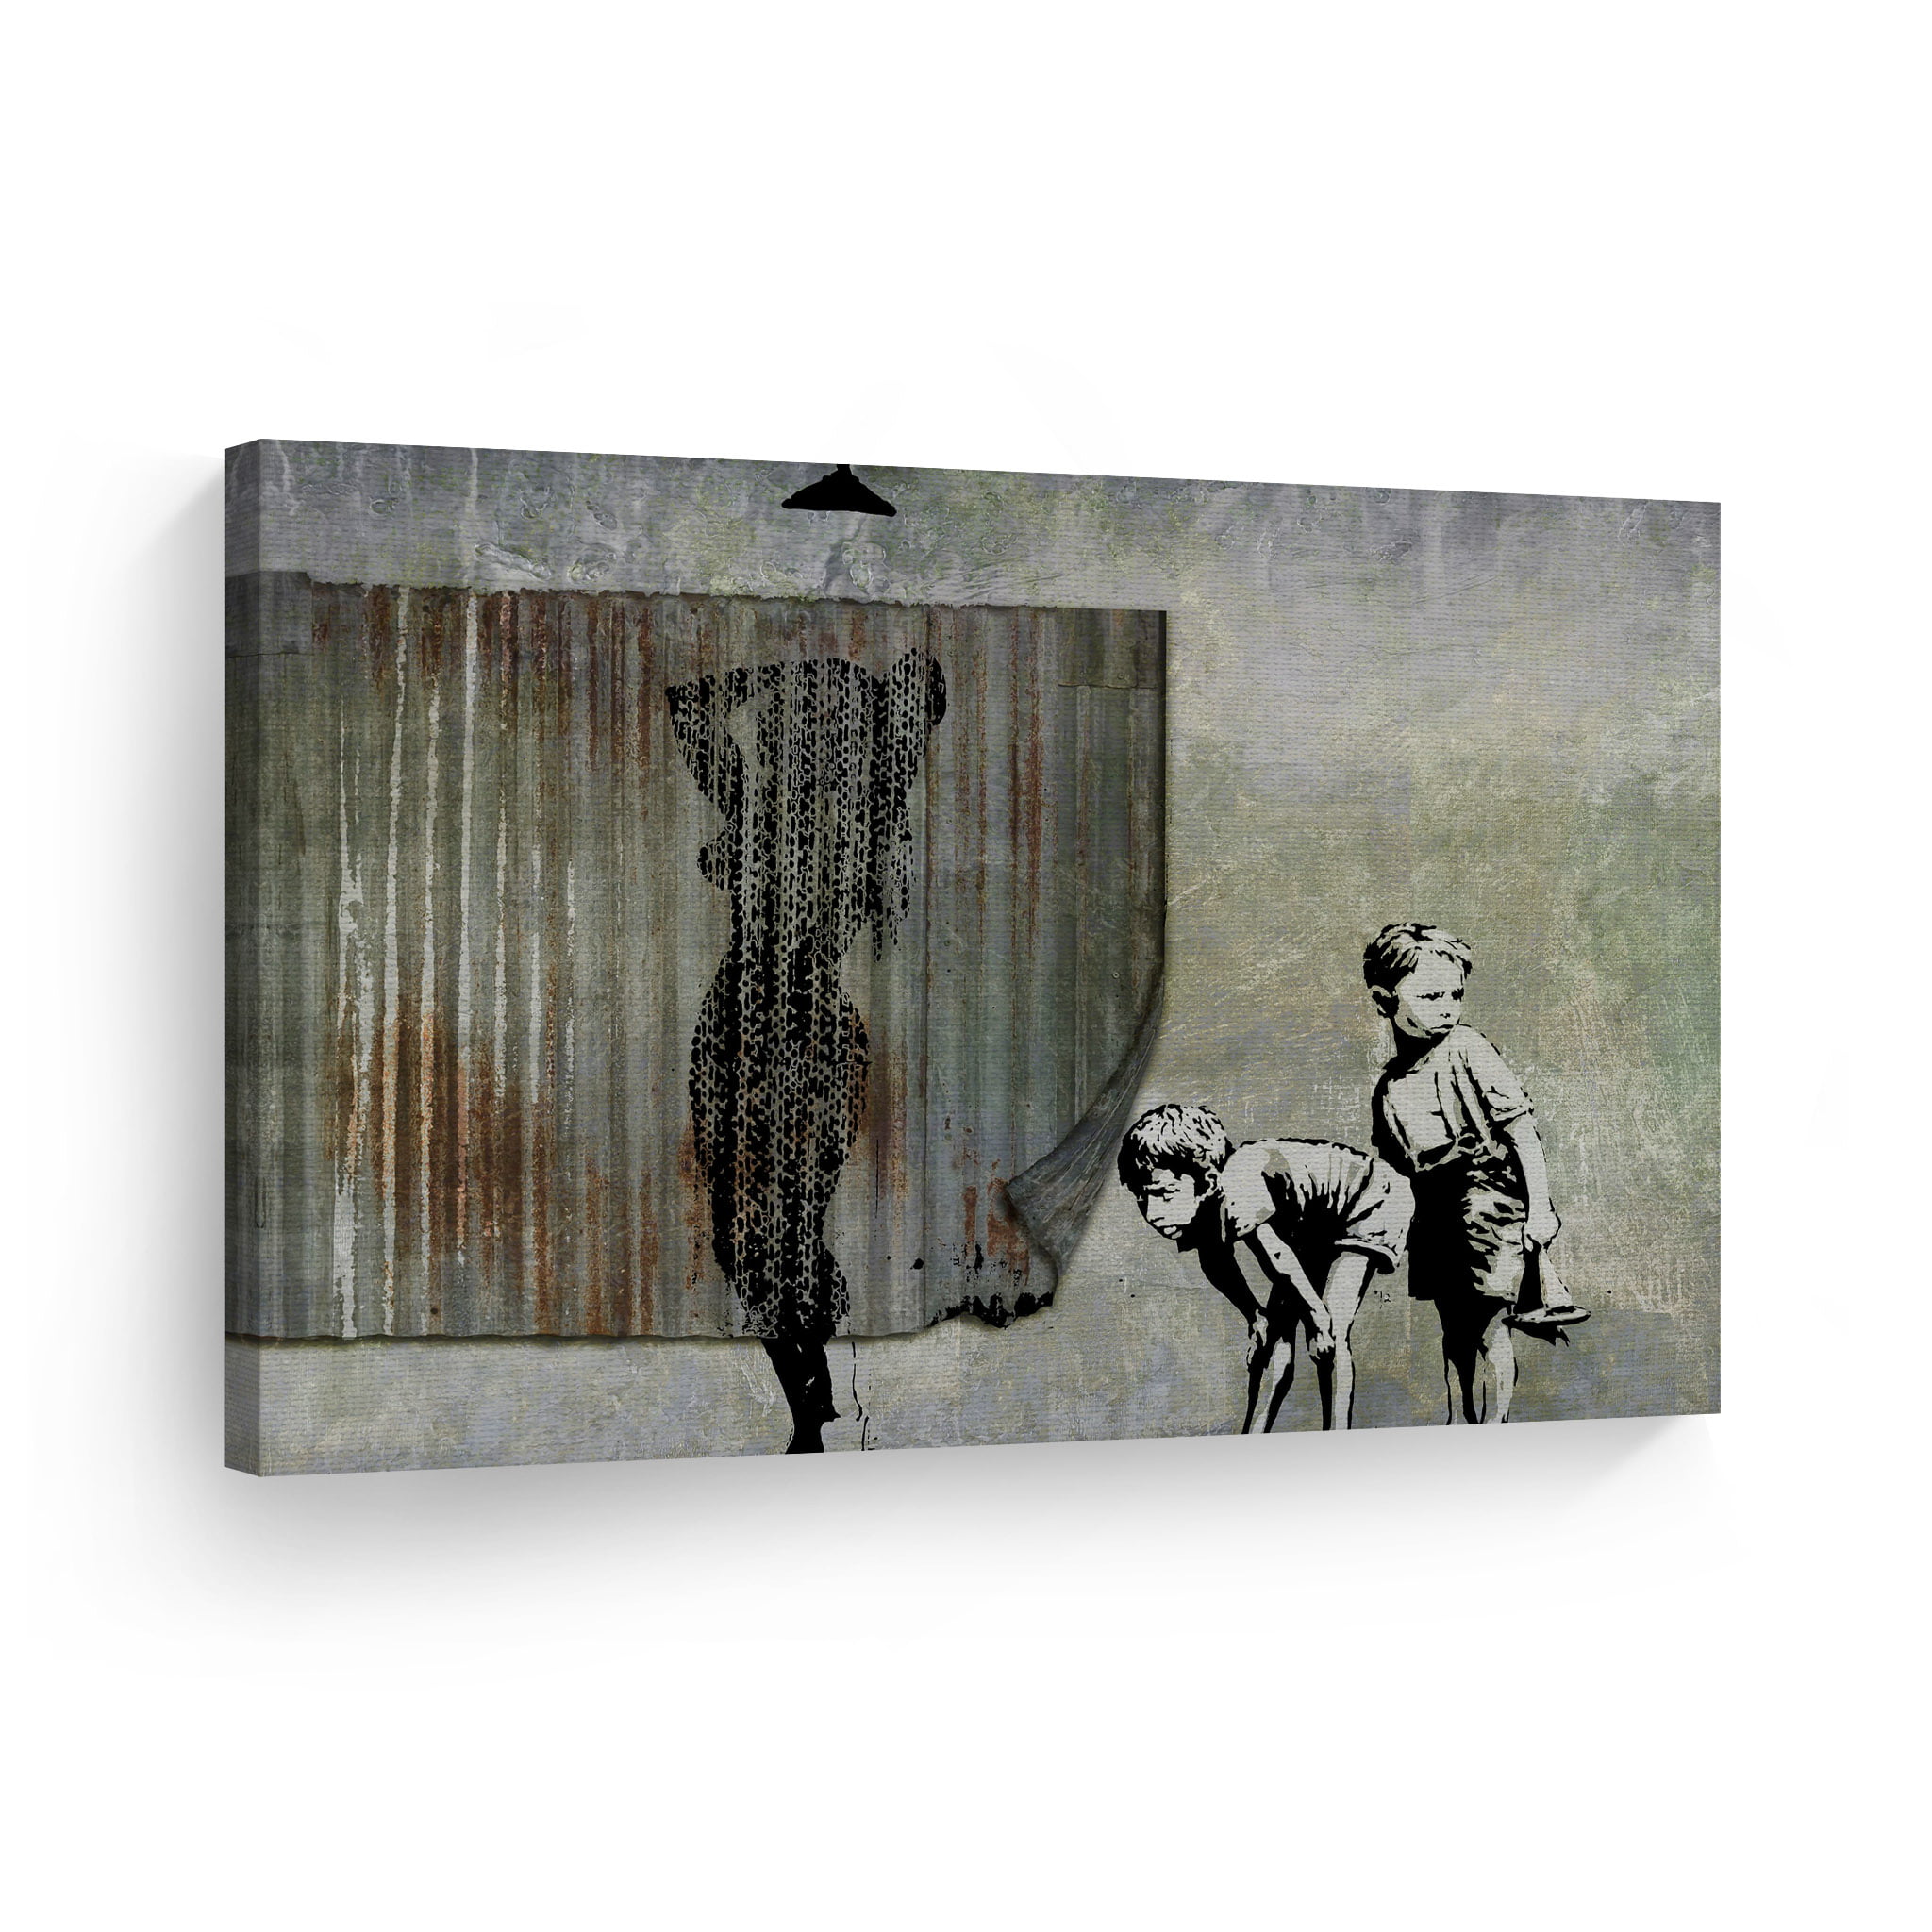 Banksy Canvas Wall Art Giclee Print Poster 20x16 inch Ready to Hang Abstract Graffiti Street Pop Art Large Solid Wooden Wall Décor Colorful Painting Framed Artwork for Living Room Bedroom Bathroom 